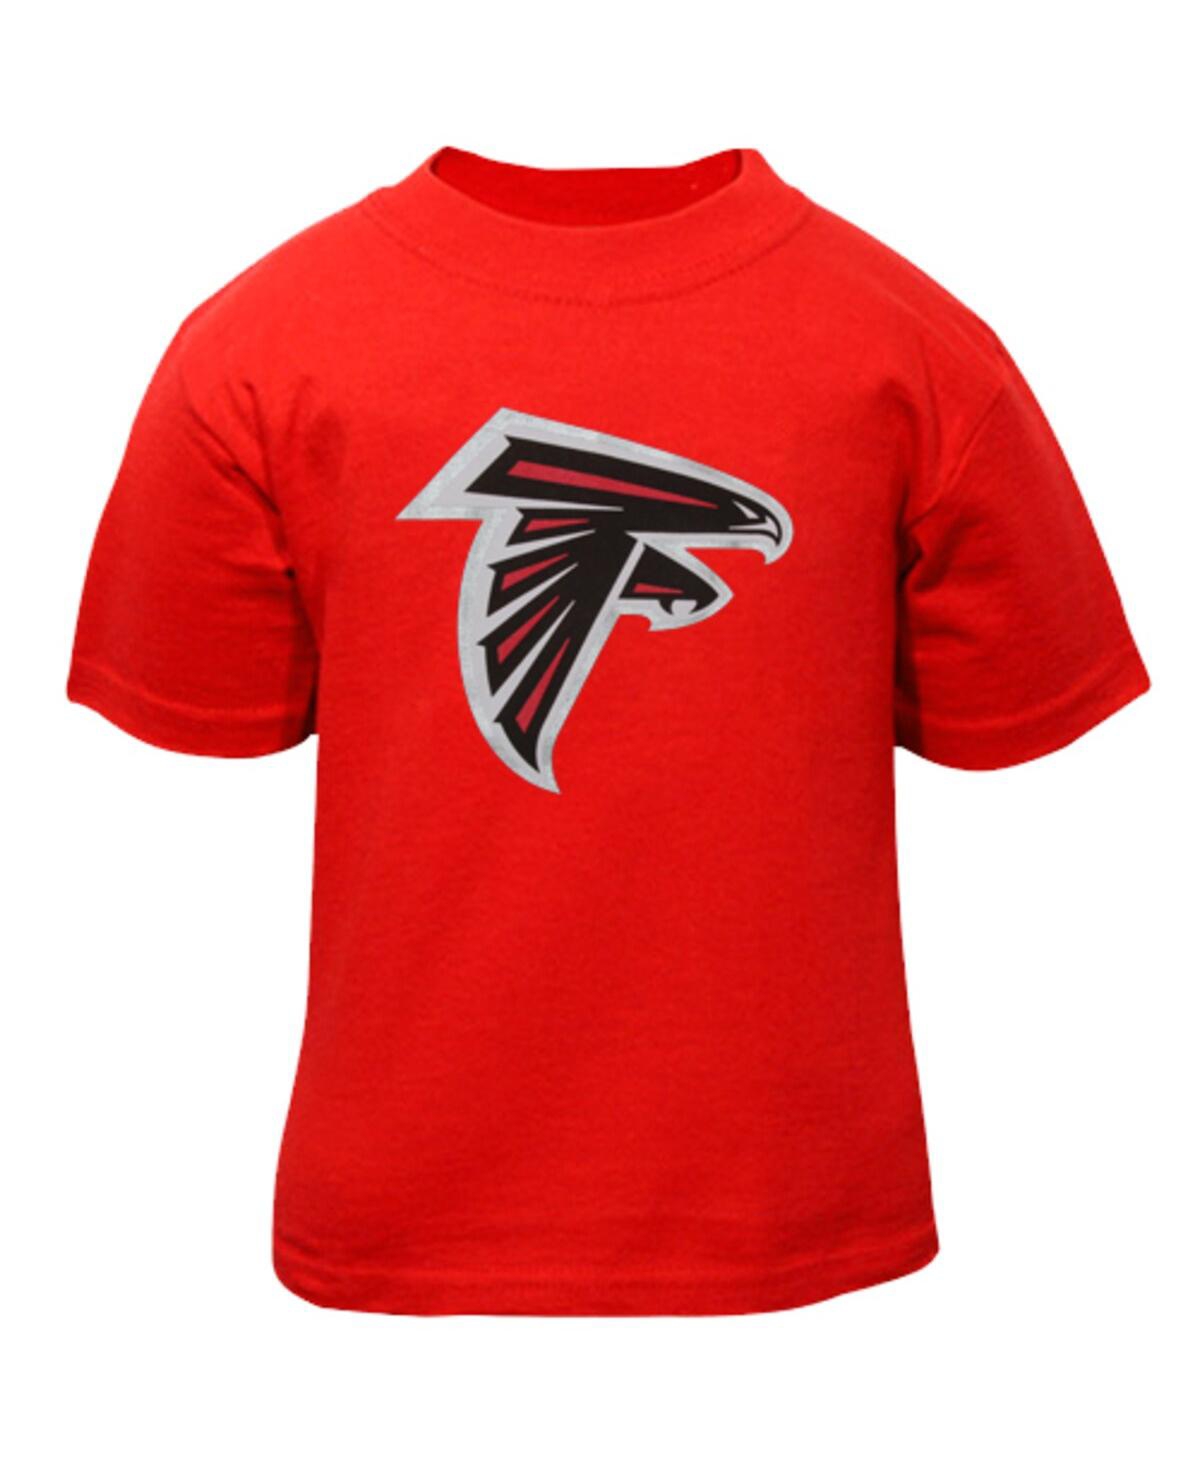 Outerstuff Babies' Atlanta Falcons Infant Boys And Girls Team Logo Red T-shirt